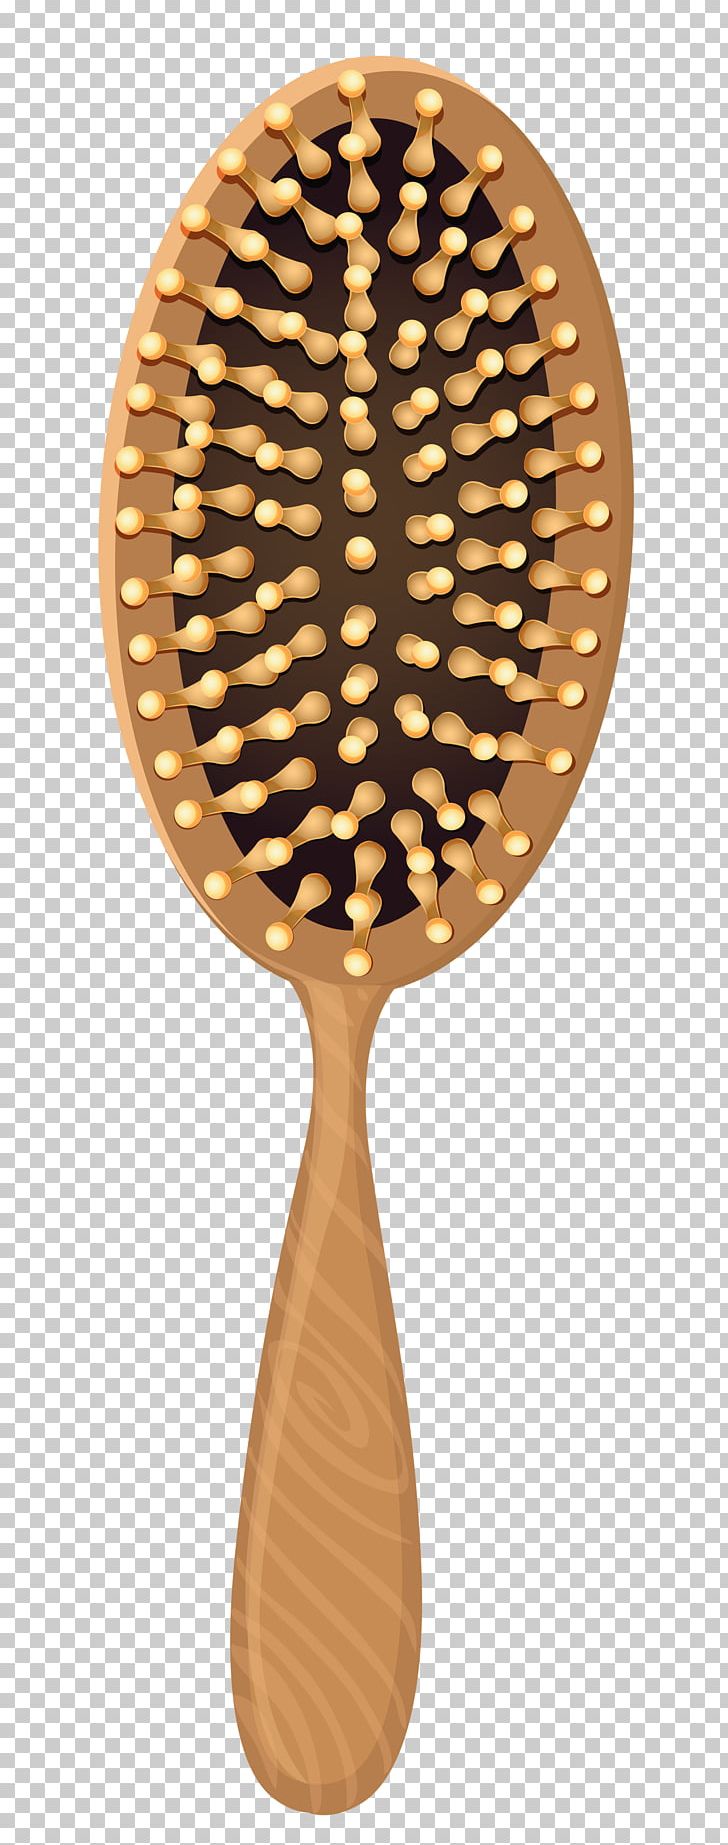 Comb Hairbrush PNG, Clipart, Barrette, Brush, Clipart, Clip Art, Comb Free PNG Download